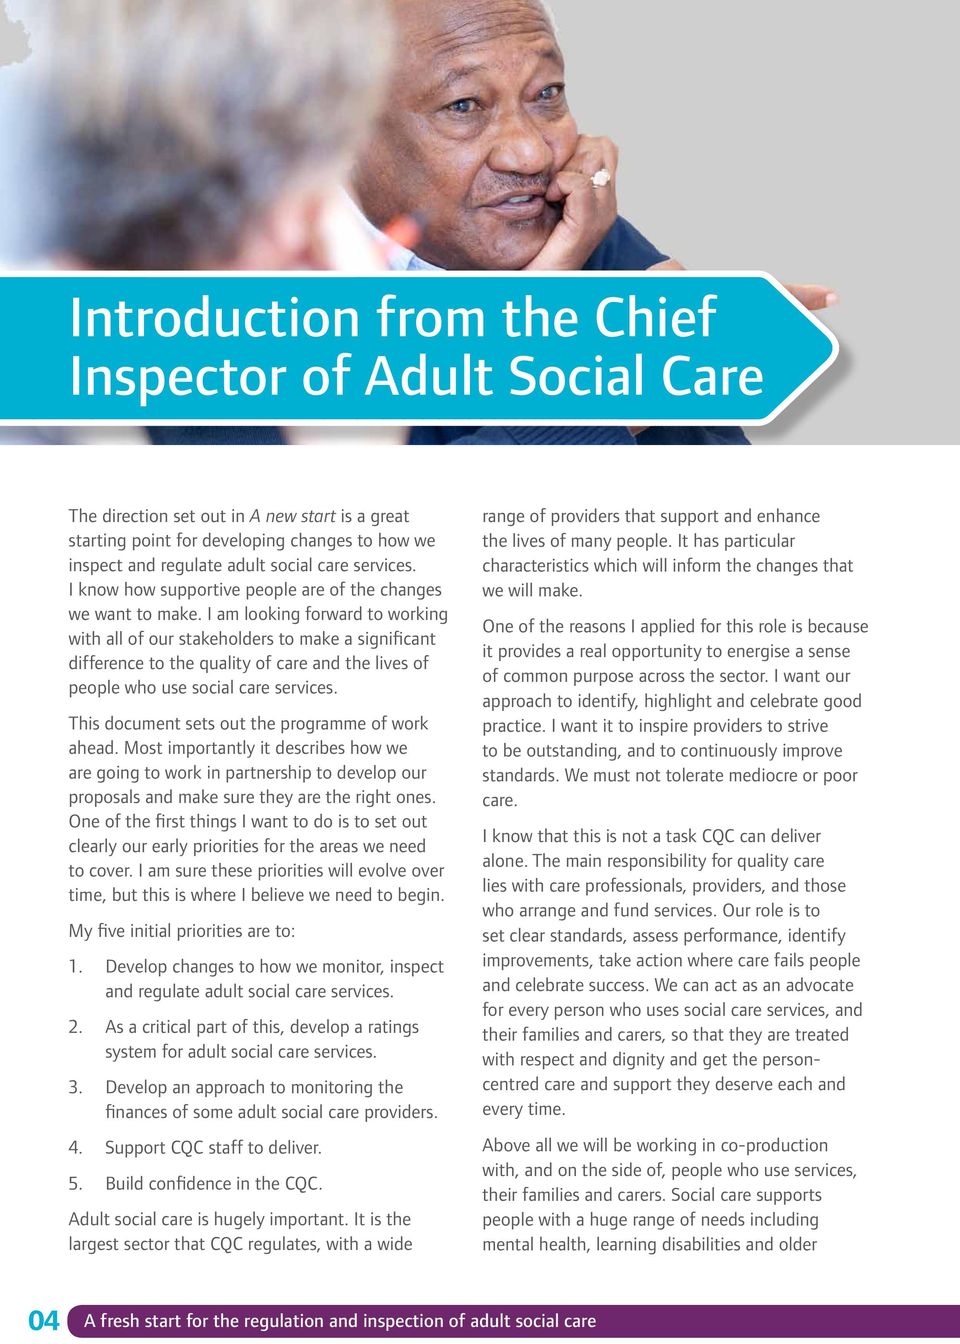 I am looking forward to working with all of our stakeholders to make a significant difference to the quality of care and the lives of people who use social care services.